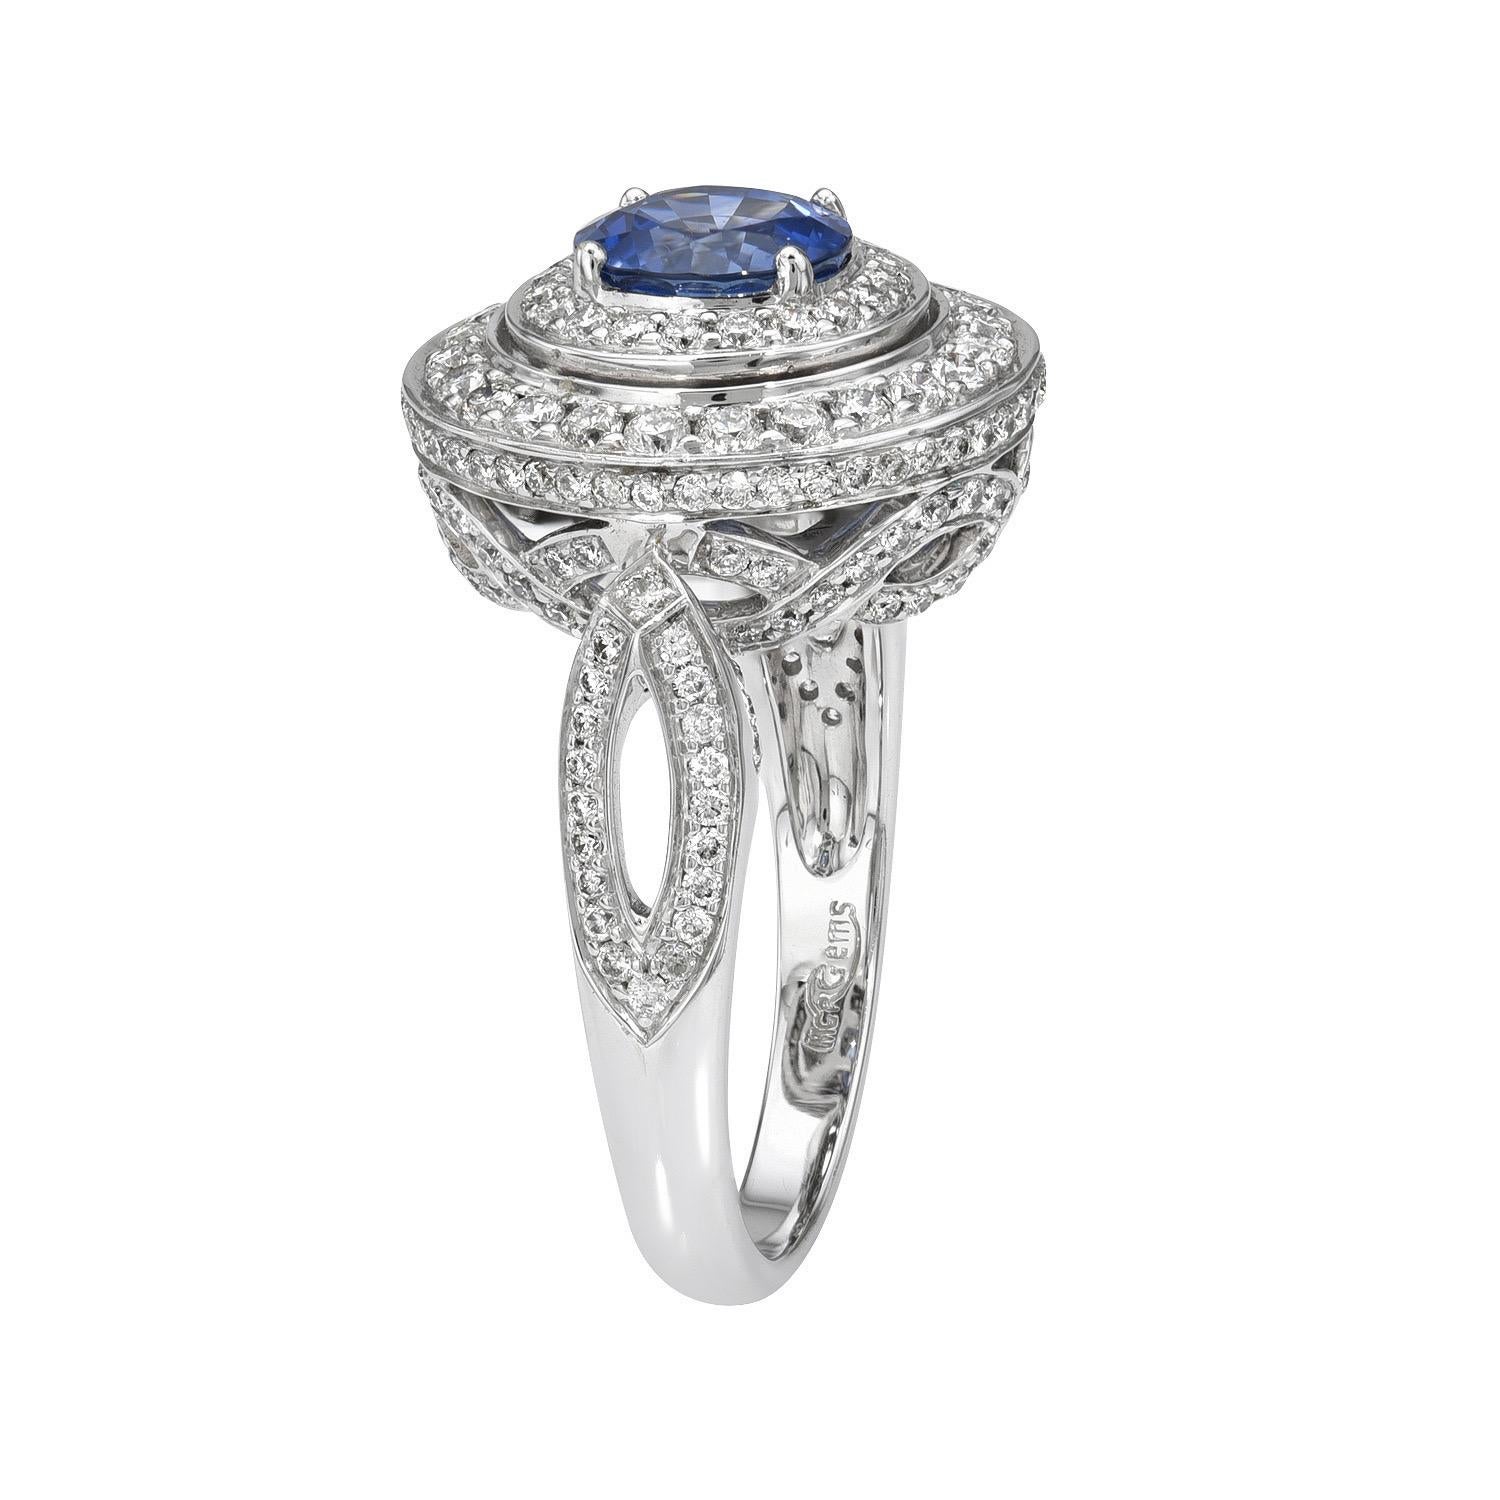 1.63 carat Blue Sapphire round, 18K white gold ring, decorated with round brilliant diamonds totaling 1.14 carats.
Ring size 6.5. Resizing is complementary upon request.
Returns are accepted and paid by us within 7 days of delivery.